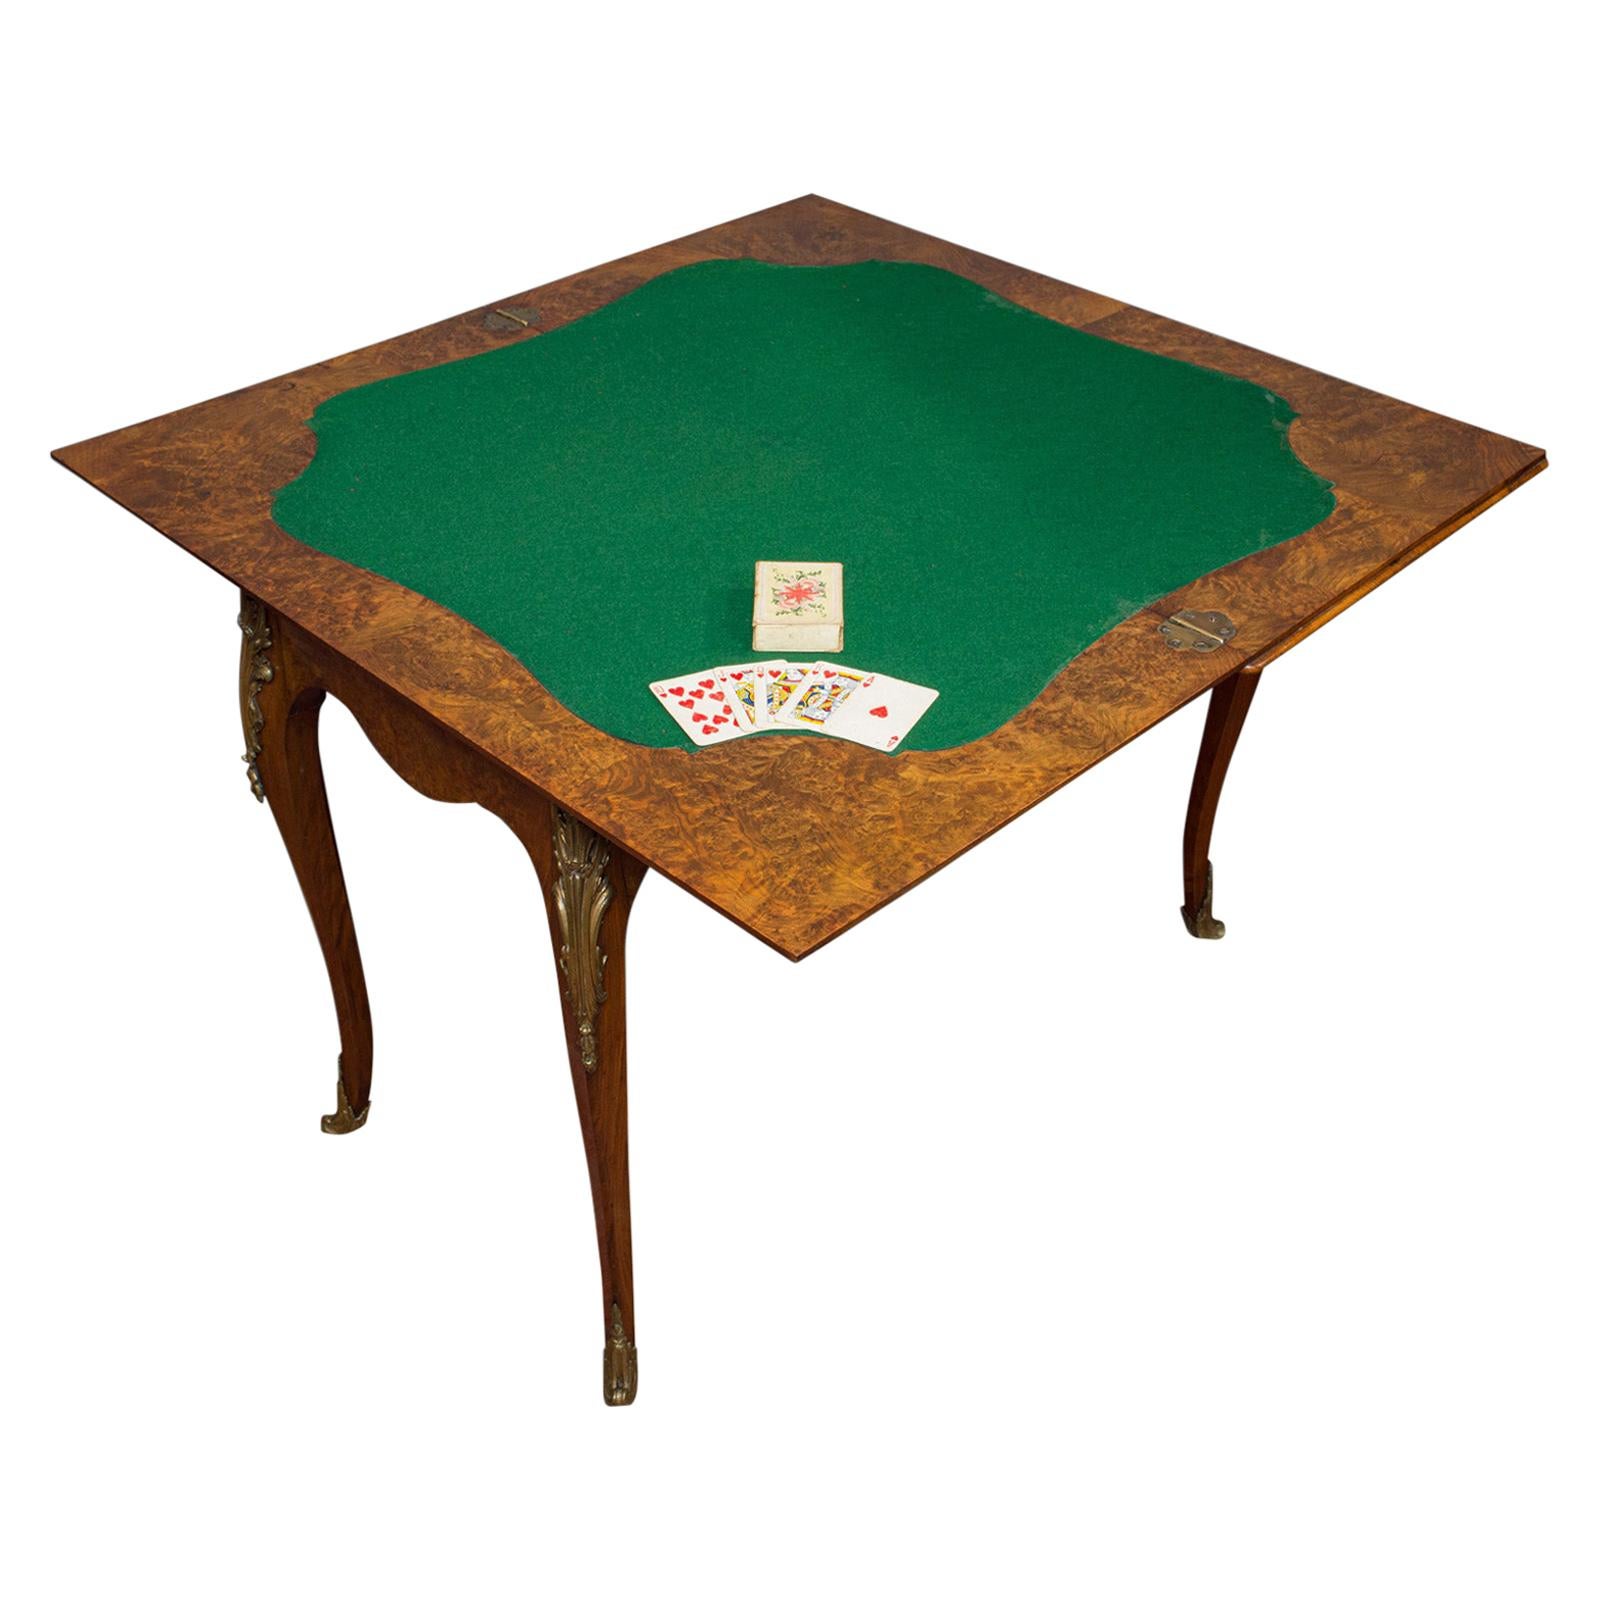 Antique Card Table, French, Burr Walnut, Fold over, Games, Victorian, circa 1870